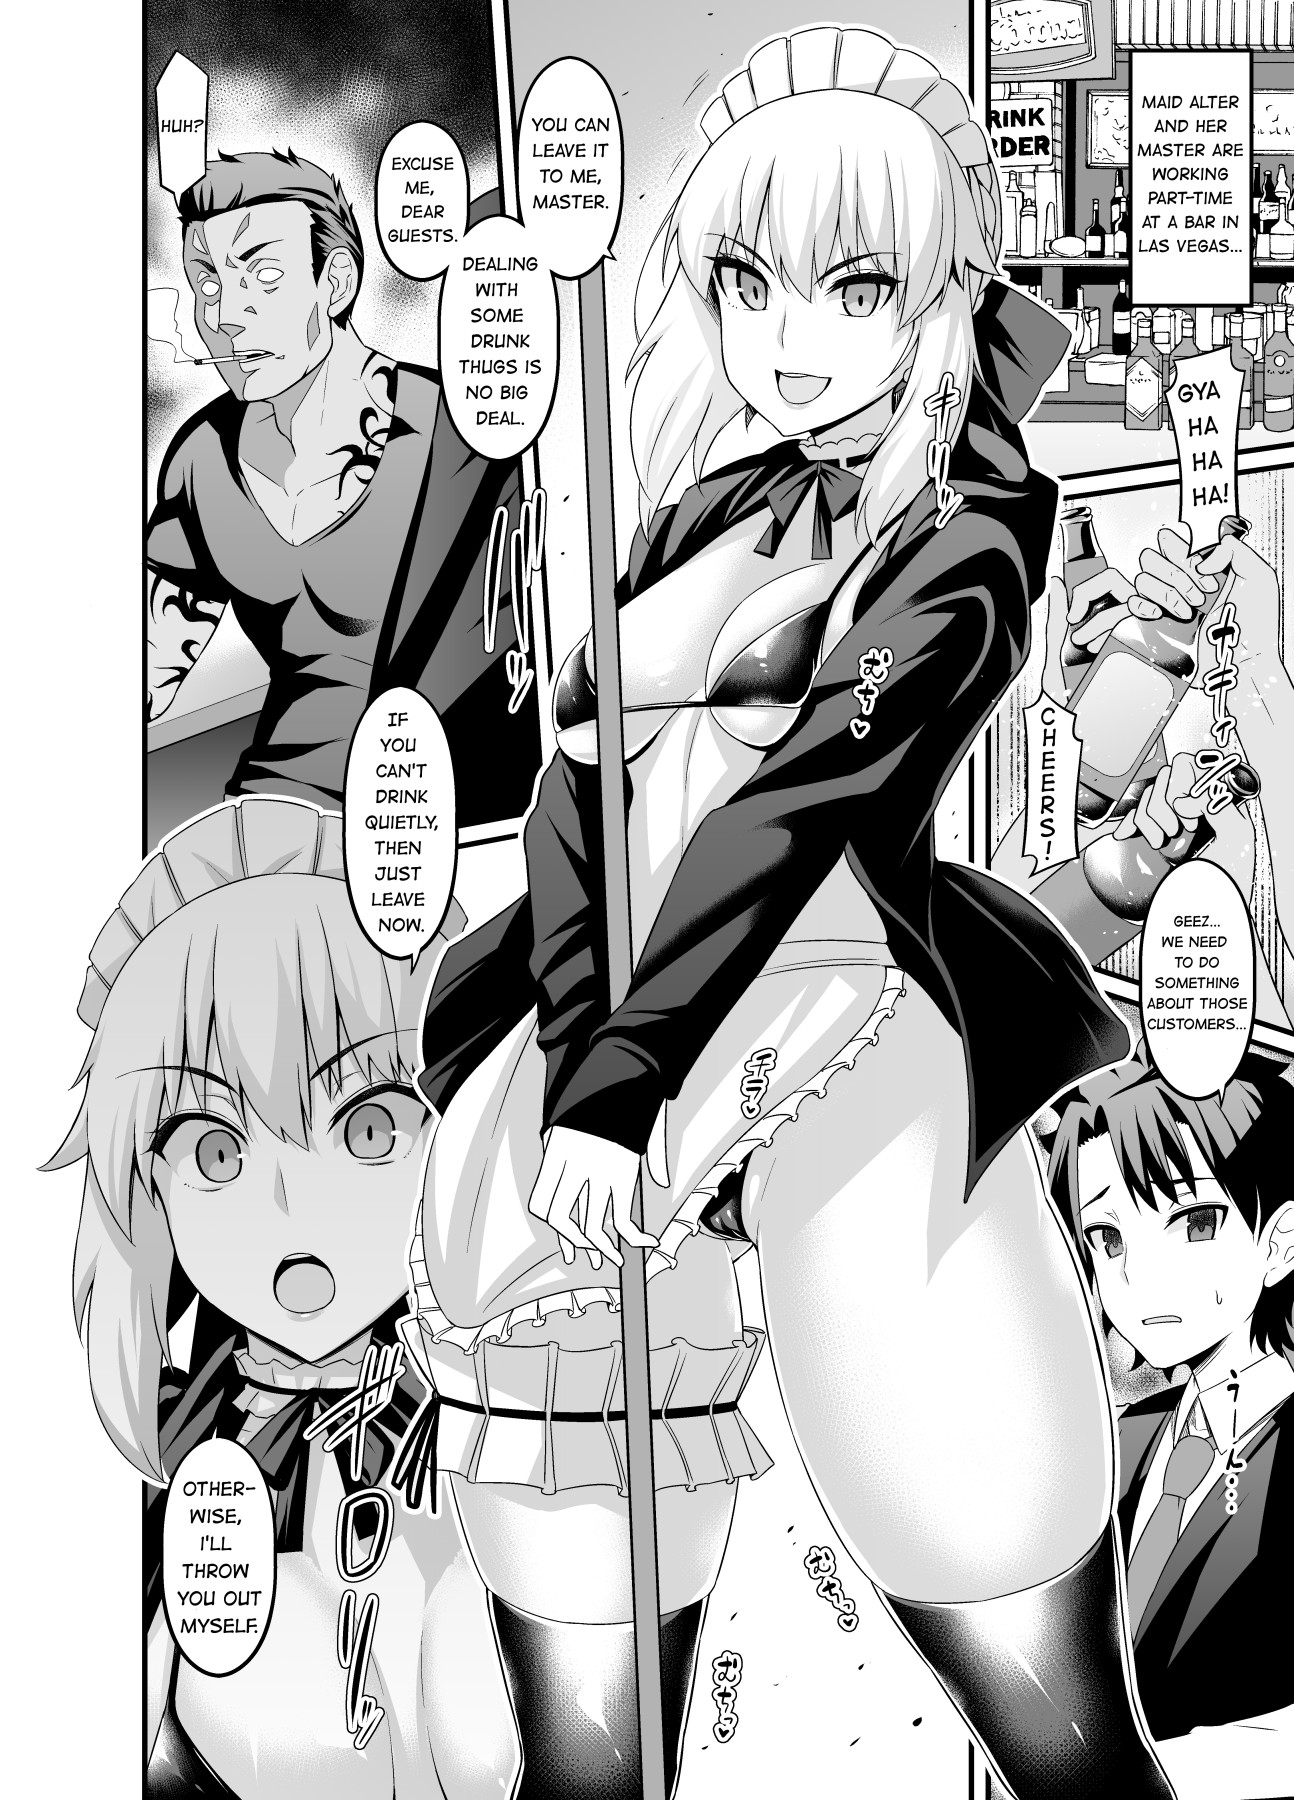 Hentai Manga Comic-Maid Alter, Getting Into a Barfight While Working Parttime-Read-1